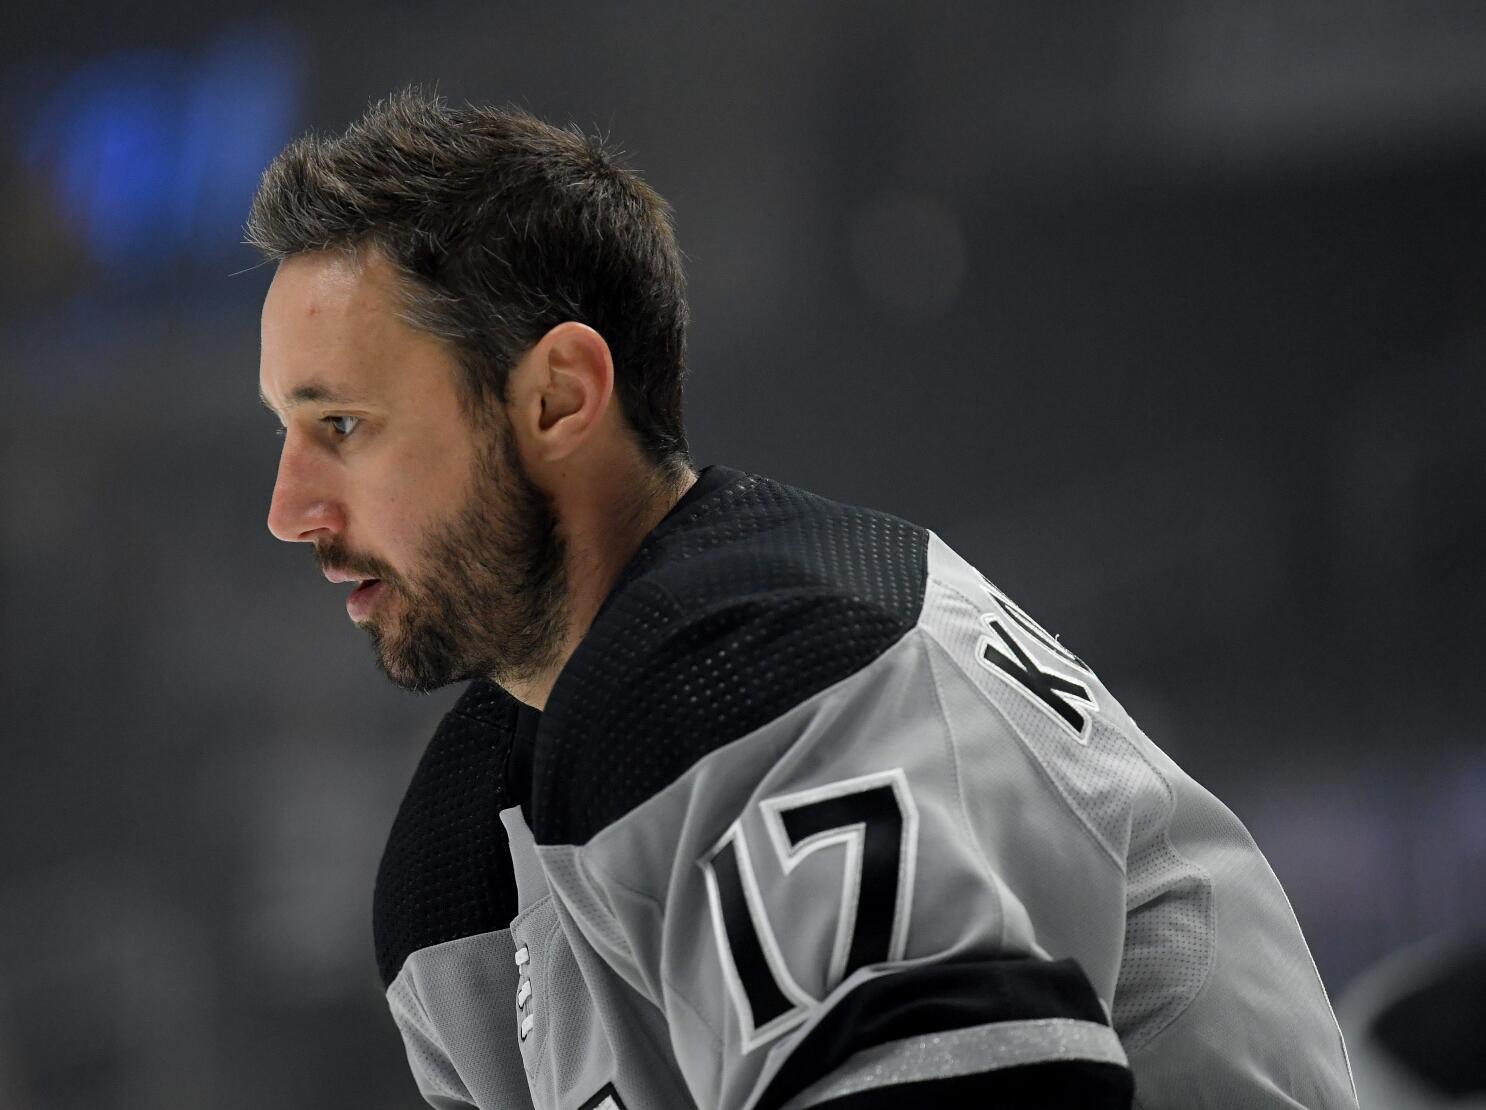 Ilya Kovalchuk downplays first game in L.A. since signing with